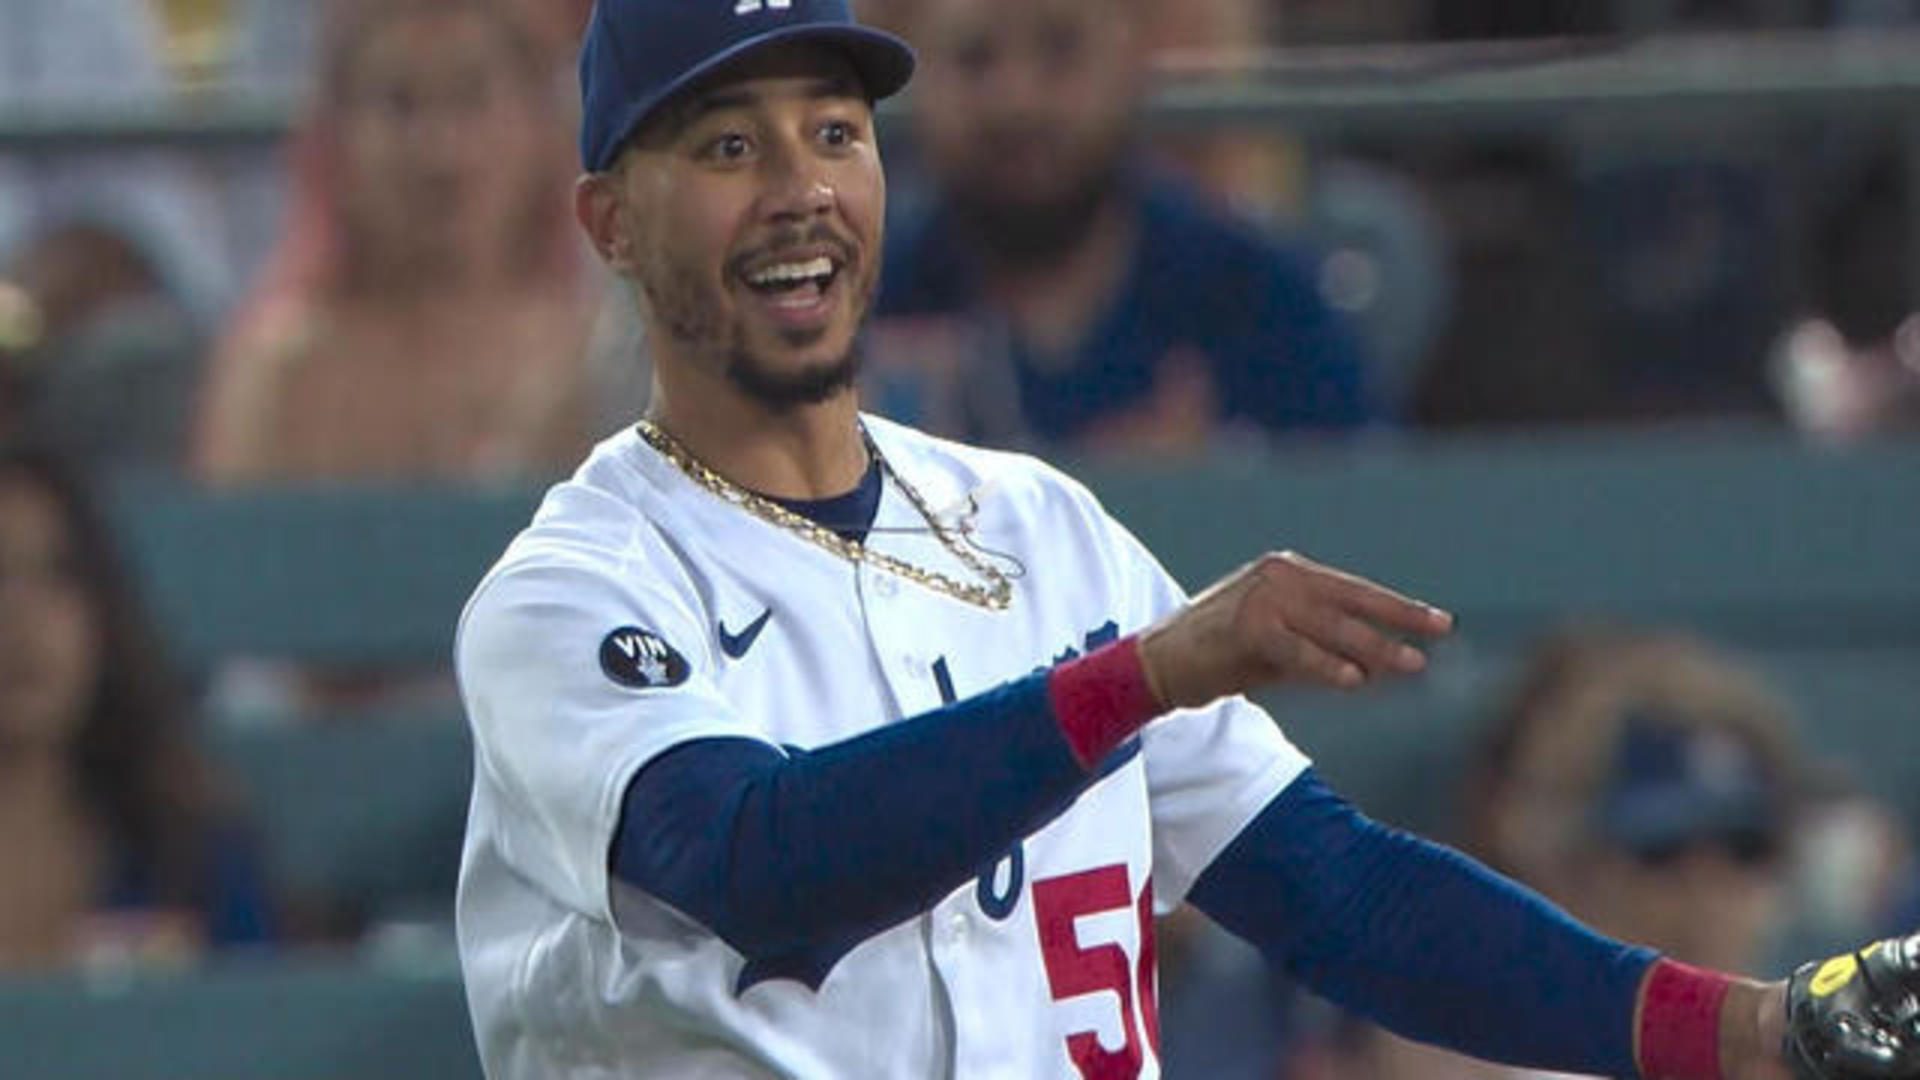 Mookie Betts and Dodgers honor legacy in stand against racism